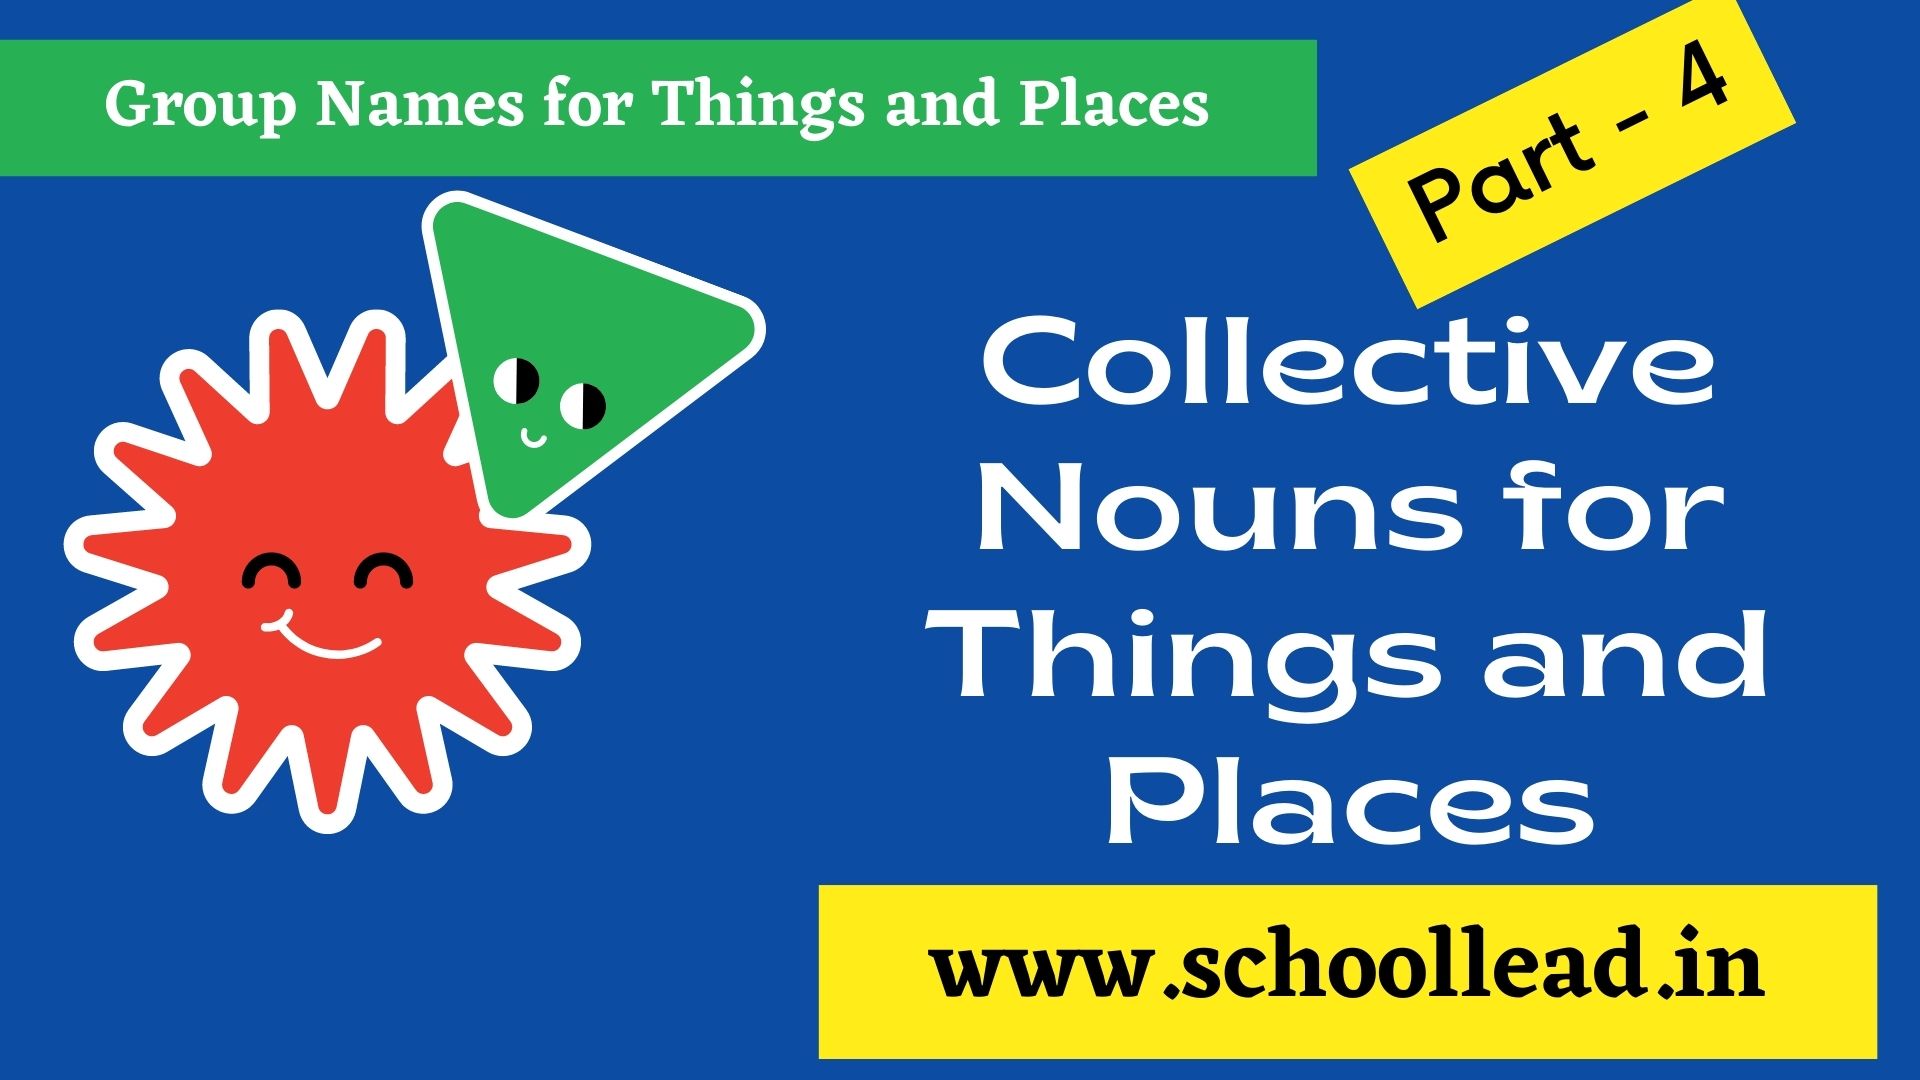 Collective Nouns for Things and Places